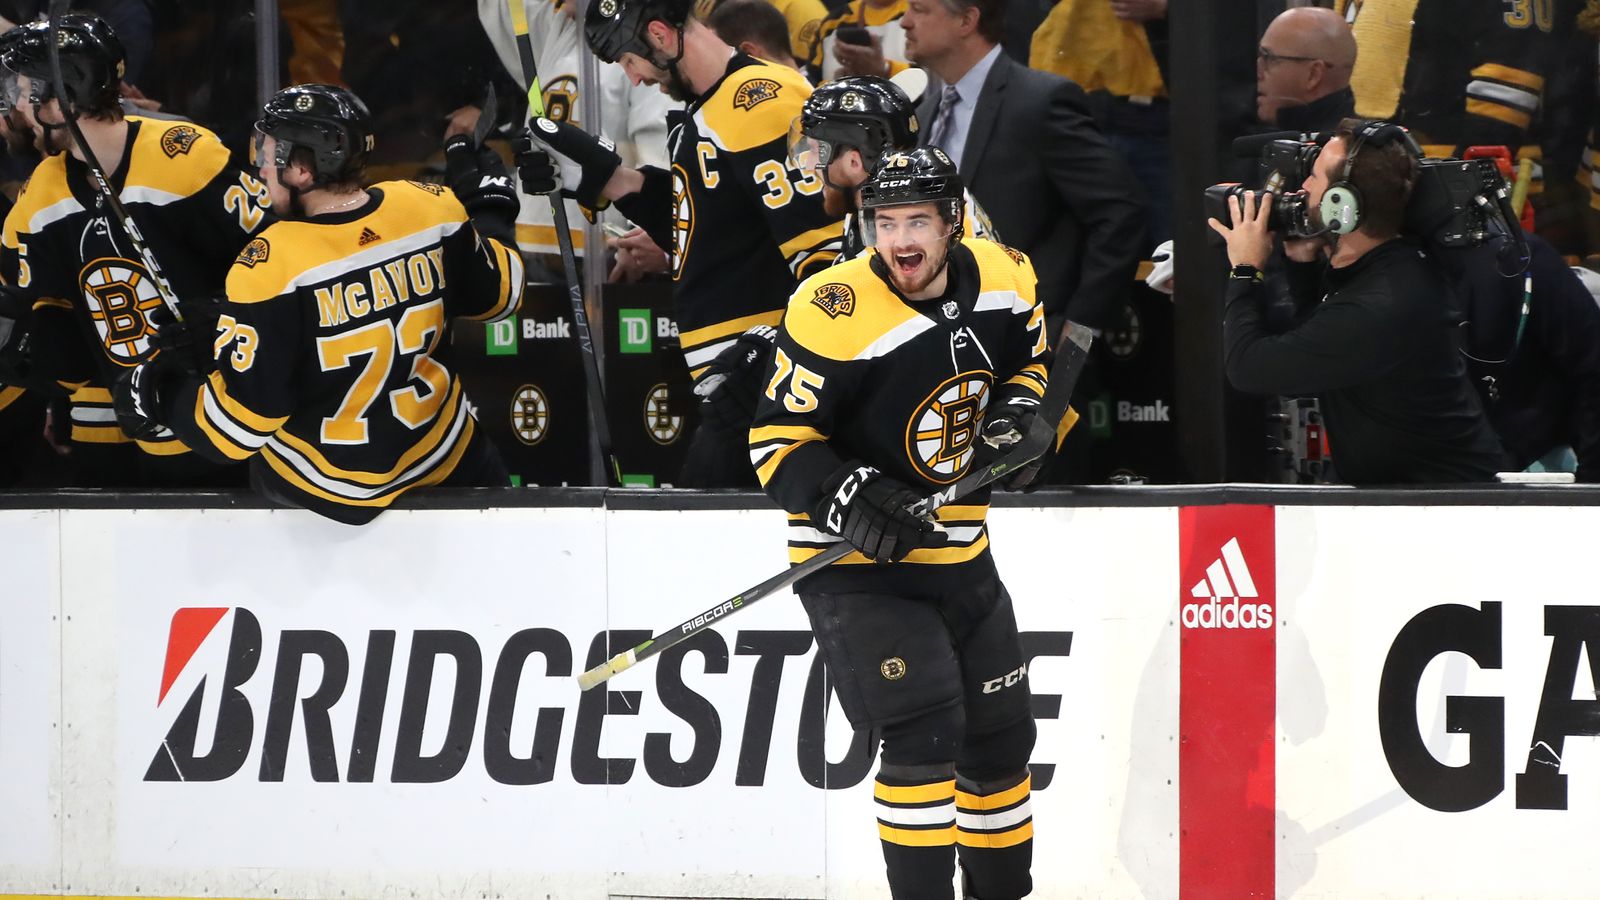 Boston Bruins: What does Kevan Miller's return mean for Connor Clifton?